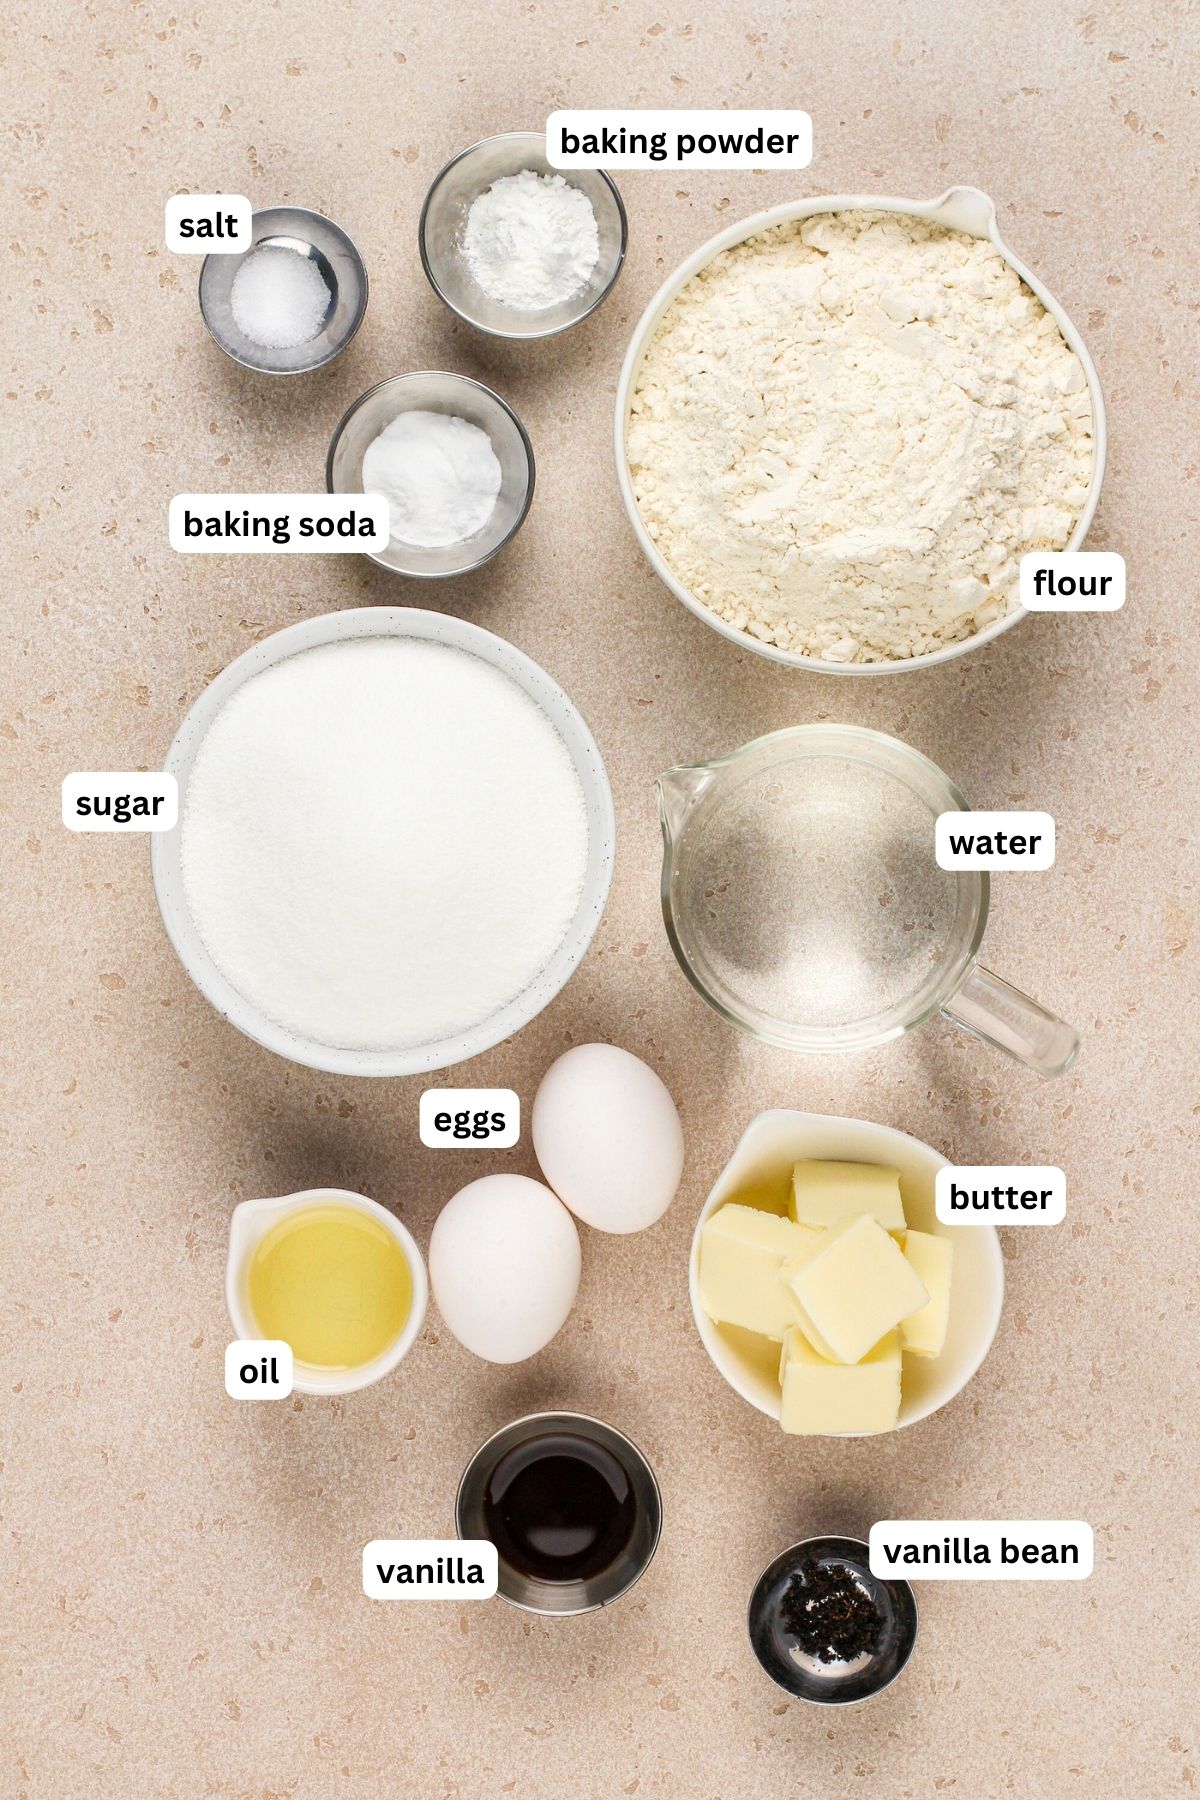 Ingredients for vanilla cake recipe arranged in bowls, from top to bottom: baking powder, salt, baking soda, flour, granulated sugar, water, eggs, oil, butter, vanilla extract and vanilla bean.